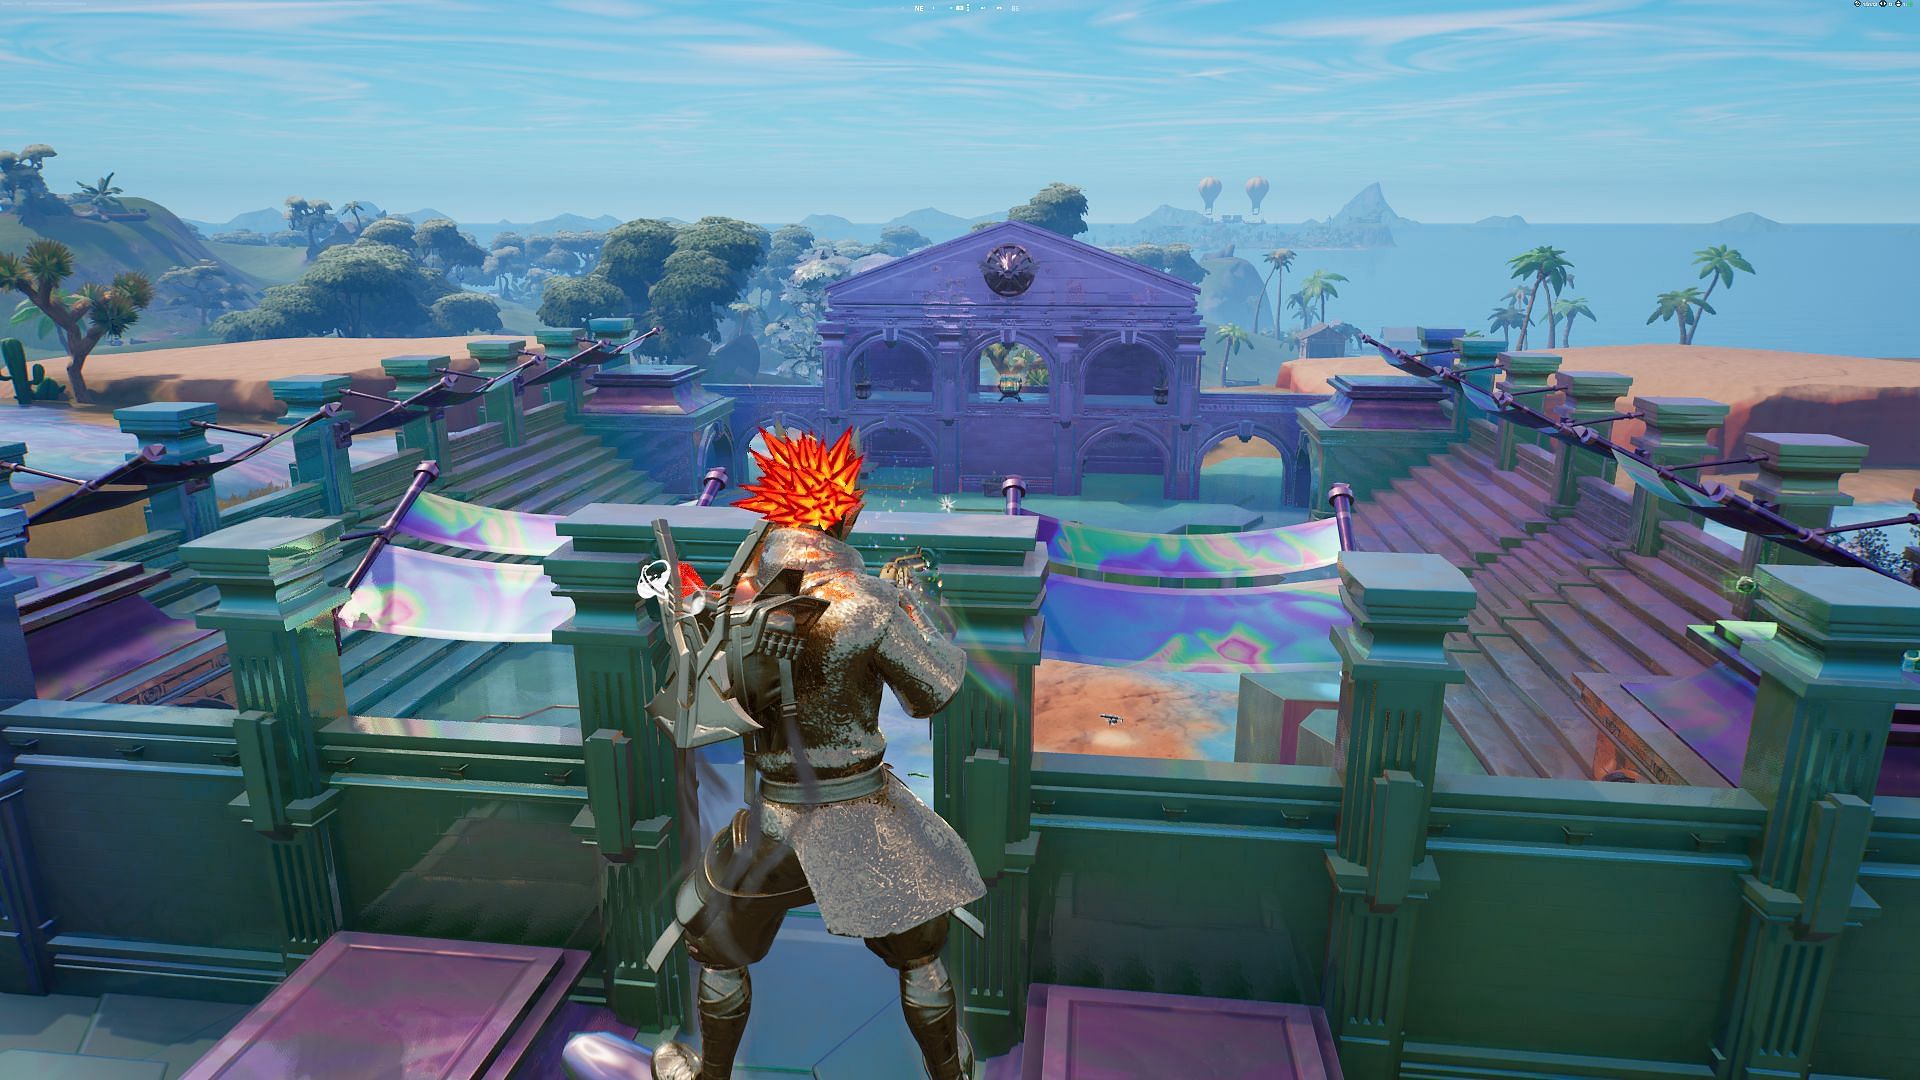 Become one with Chrome! (Image via Epic Games/Fortnite)